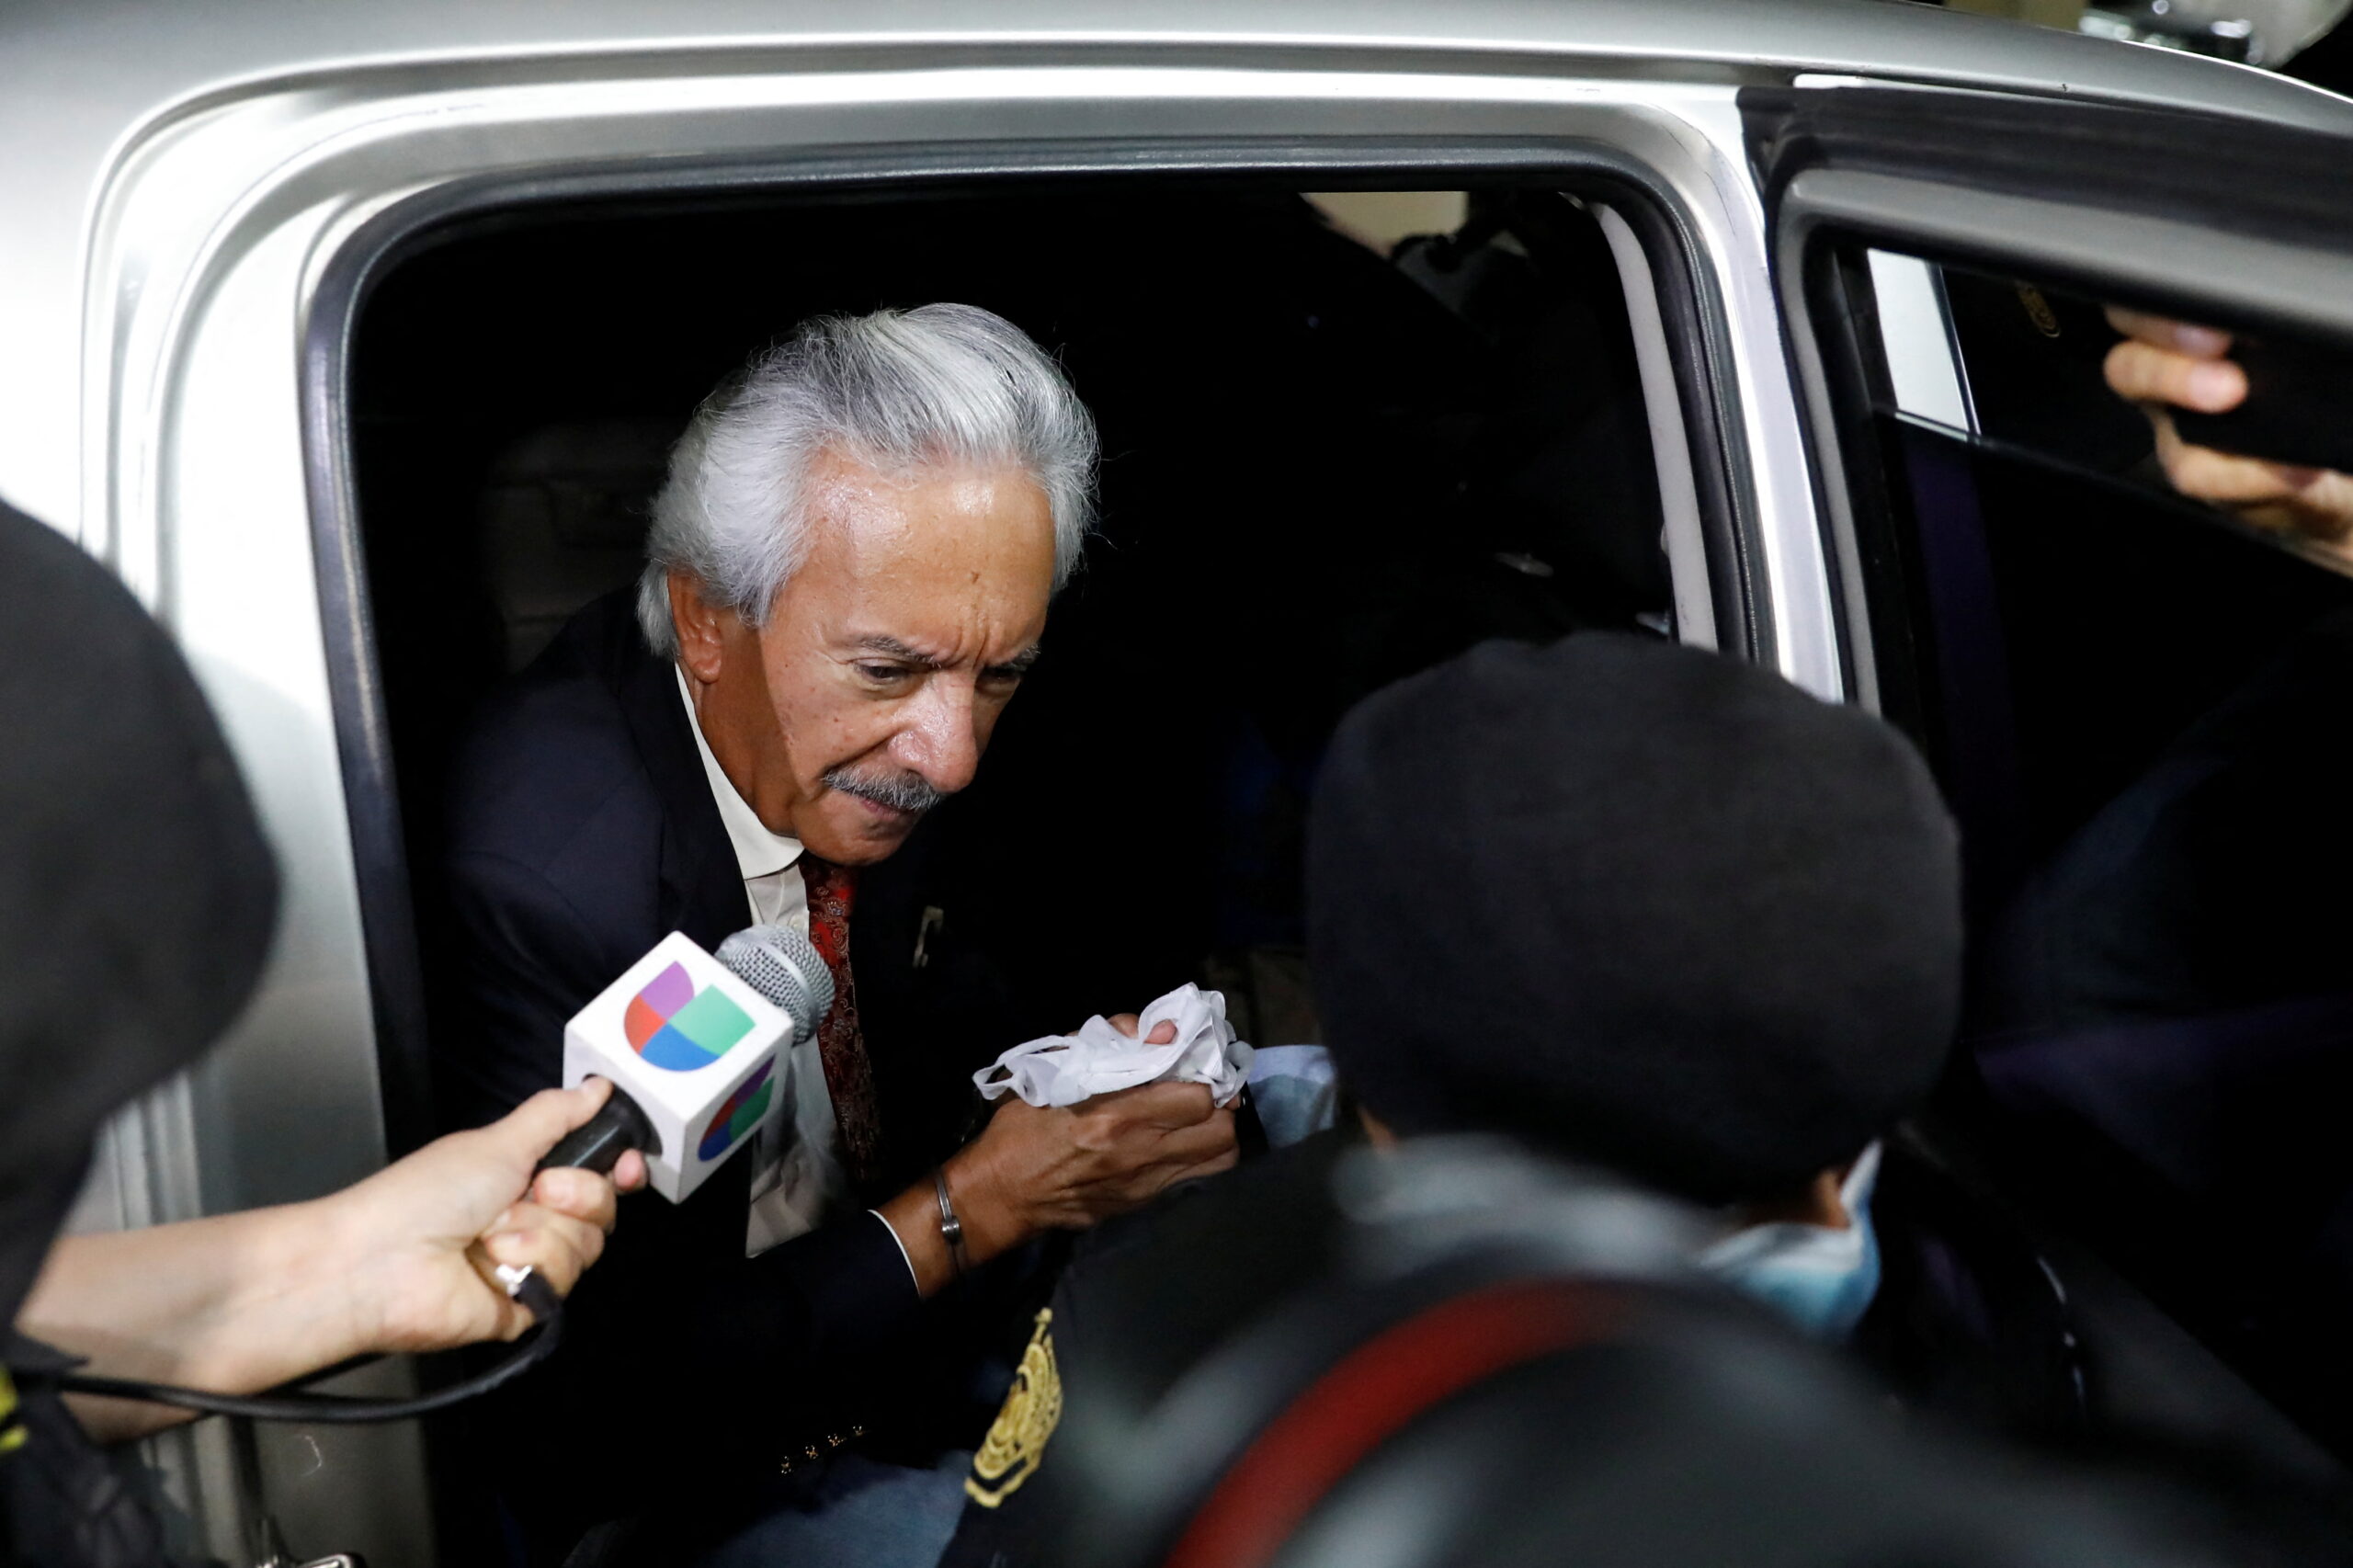 Journalist Jose Ruben Zamora Marroquin, founder and president of El Periodico newspaper, arrives at a court hearing at the towering judicial building days after his detention by Guatemalan authorities on money laundering and blackmail allegations